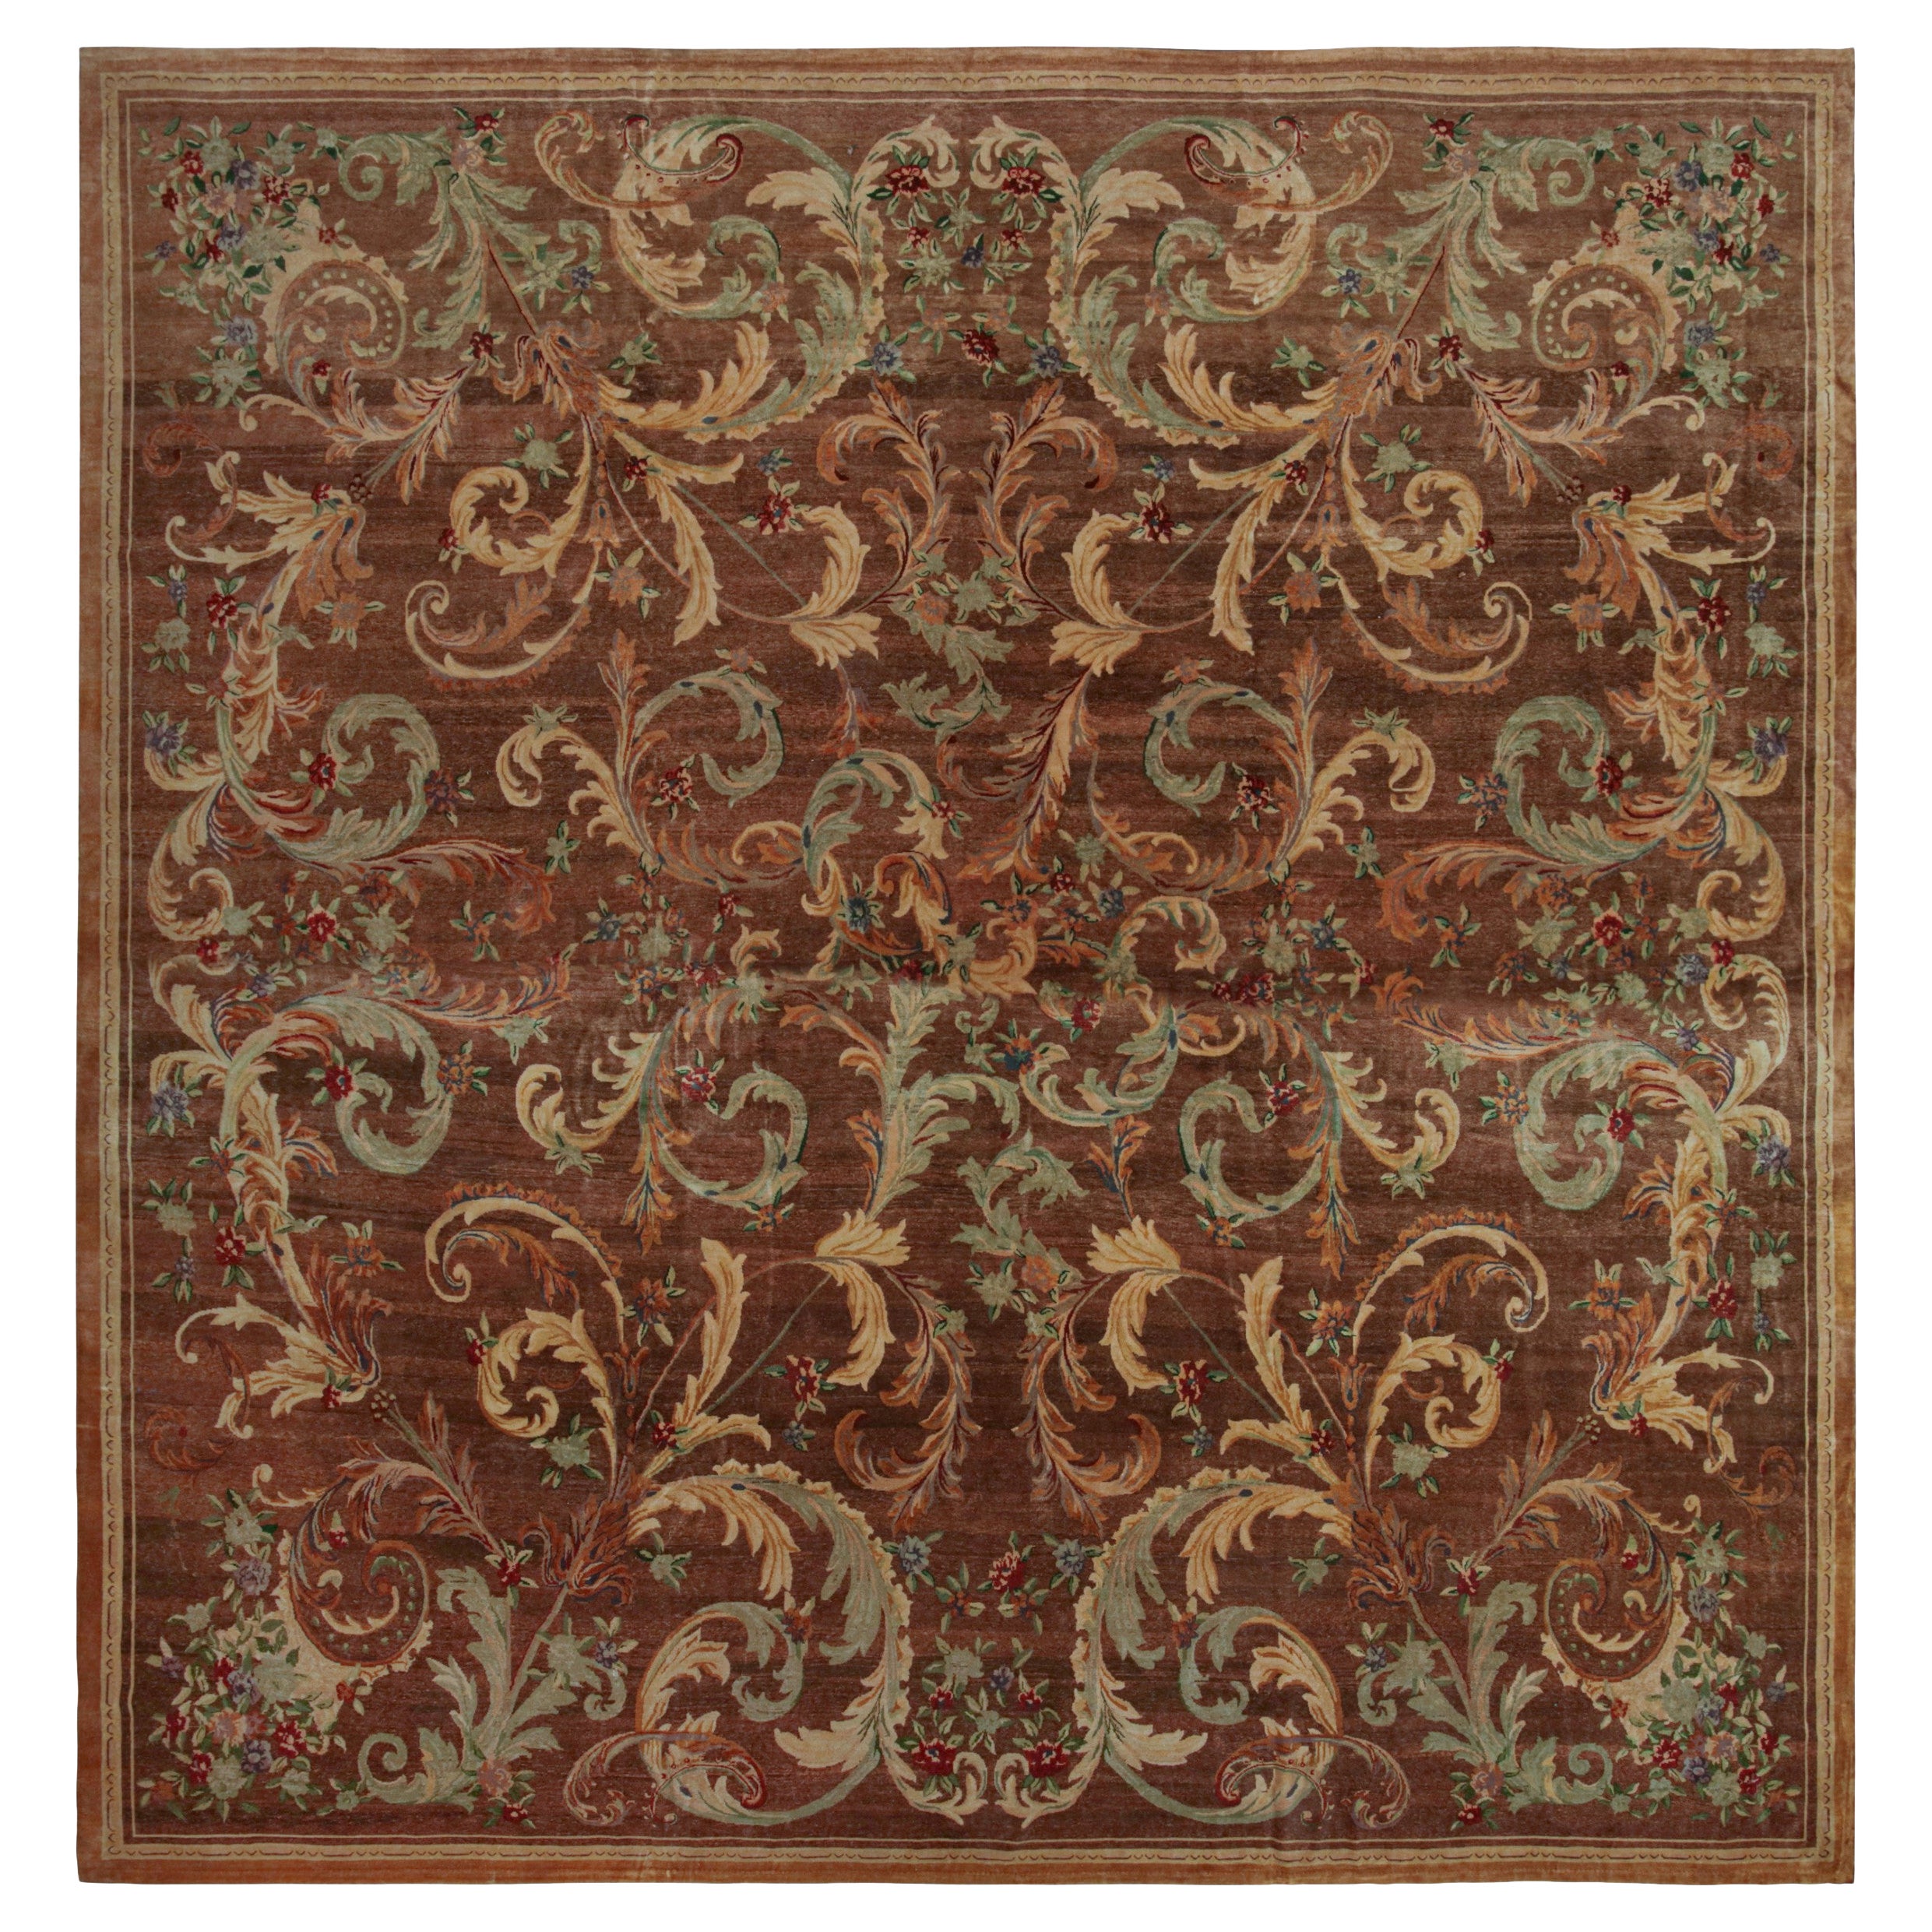 Vintage French Savonnerie Rug, in Brown, with Floral Patterns